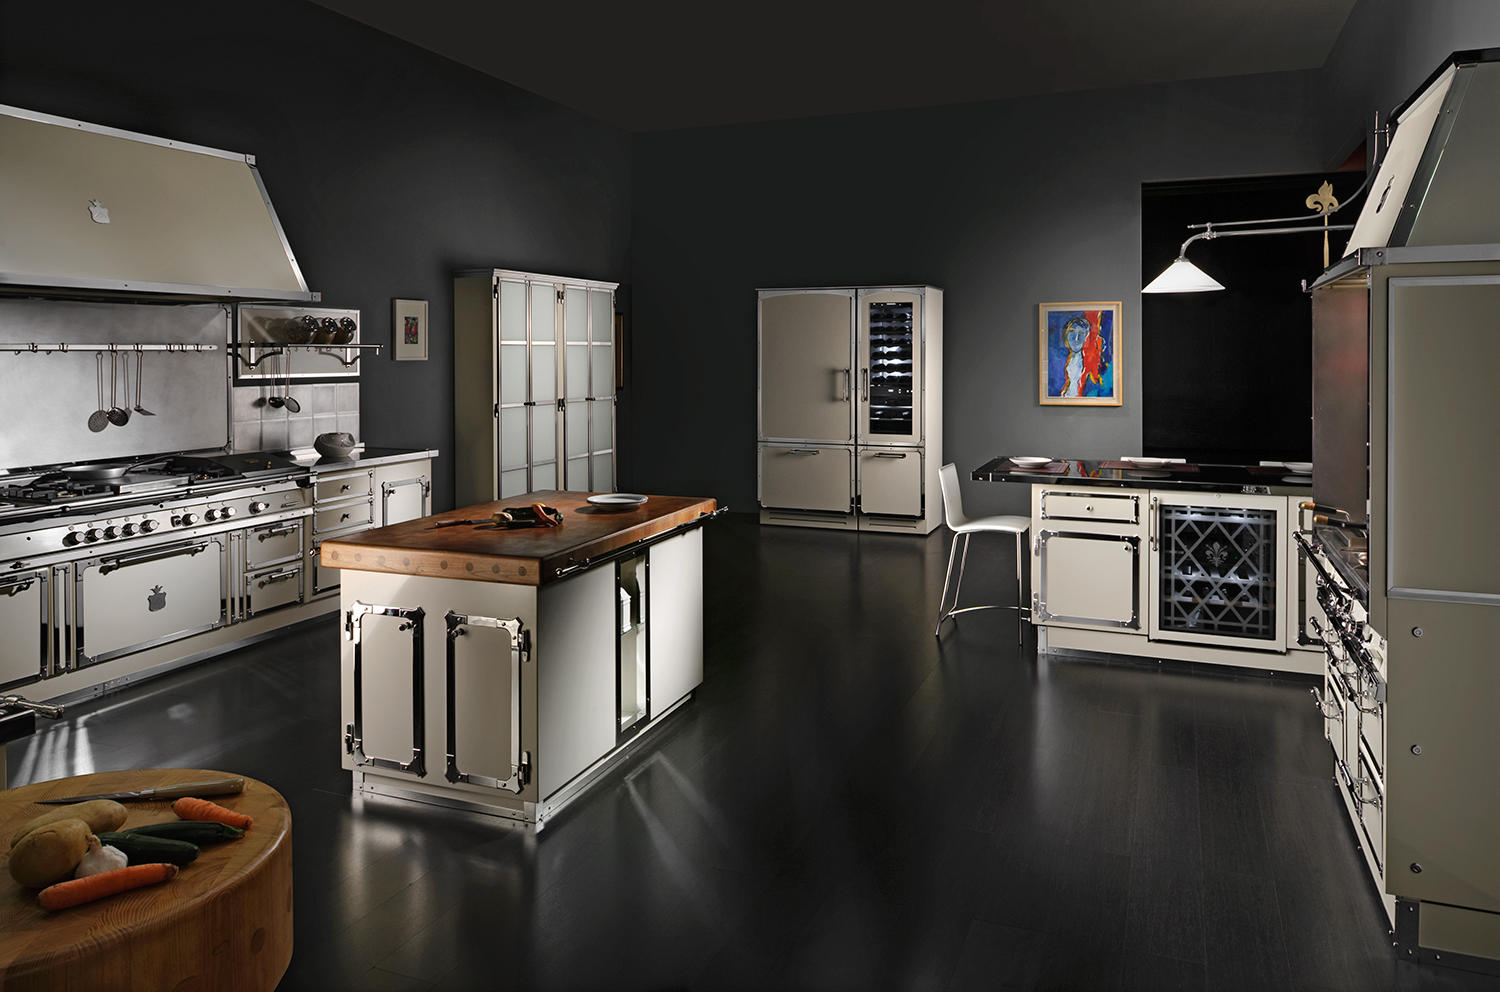 SIGNORIA PALACE KITCHEN Fitted Kitchens From Officine Gullo